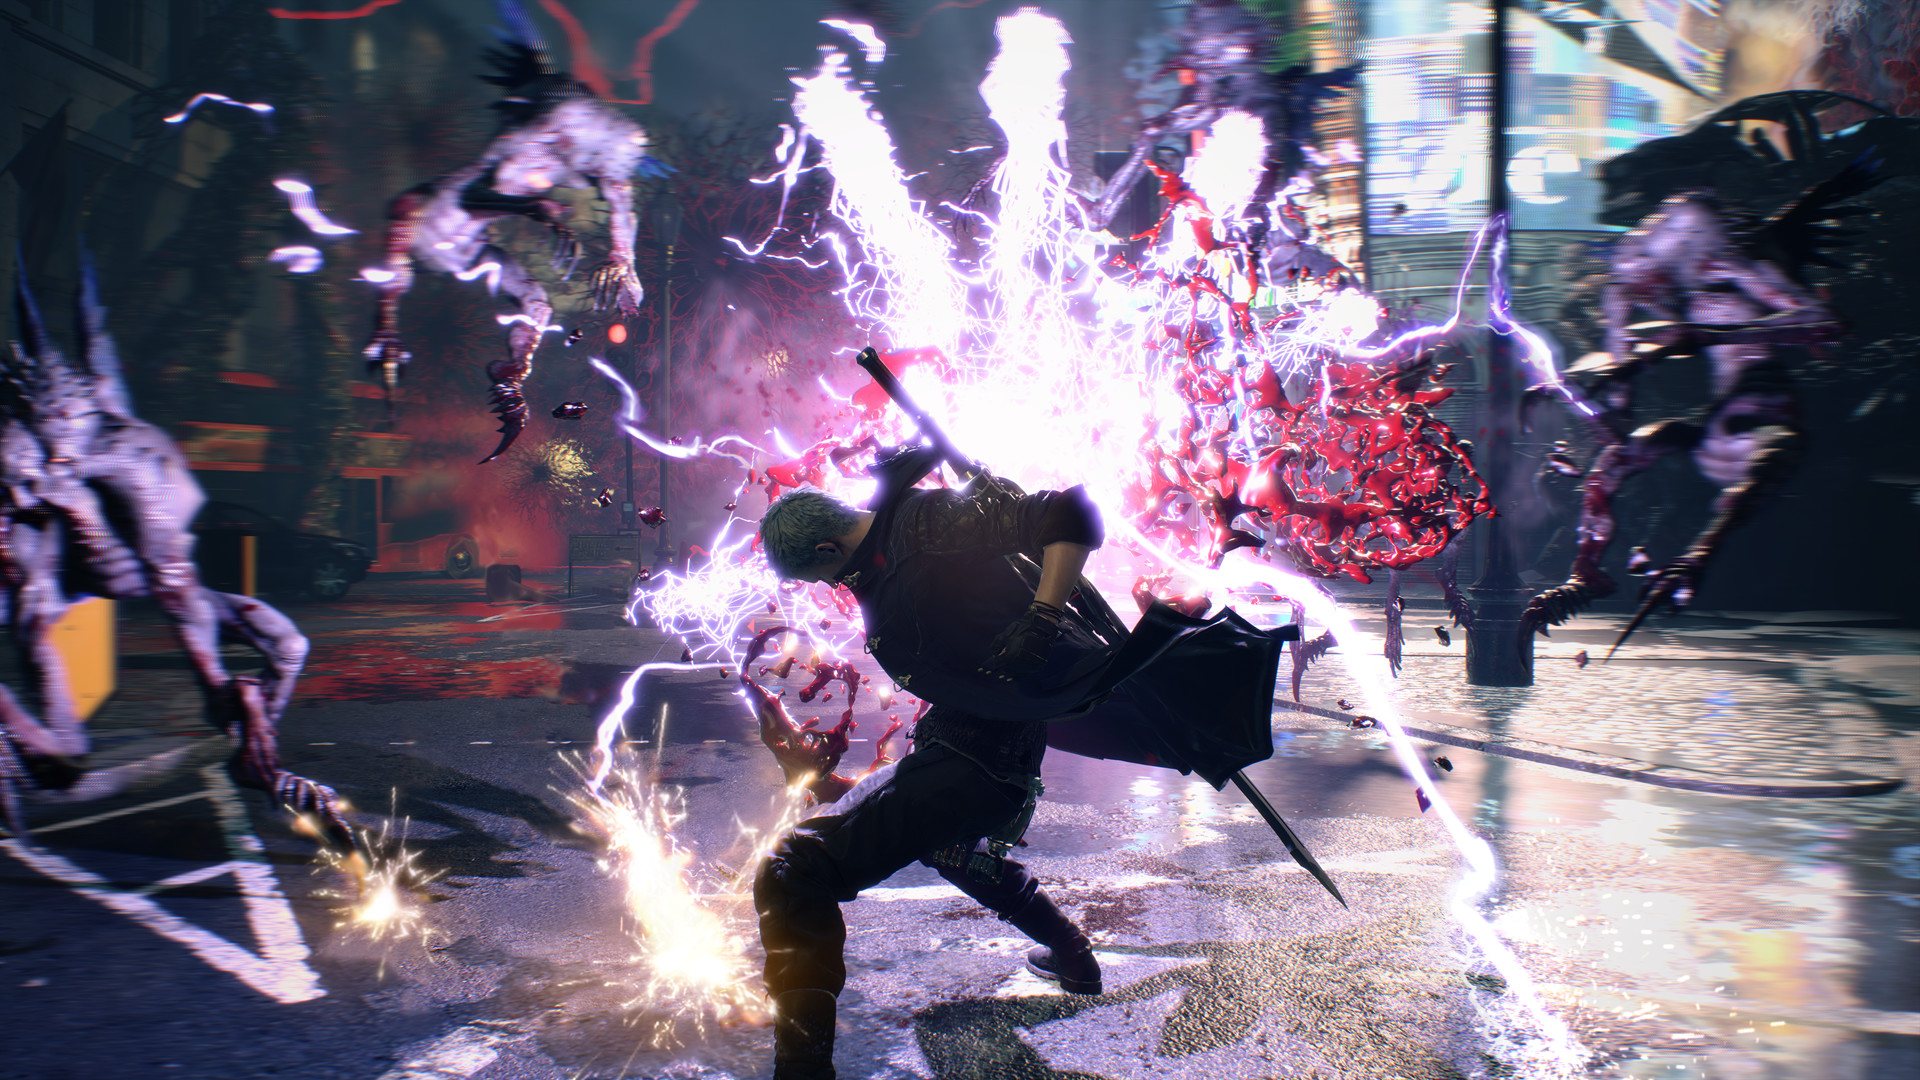 Devil May Cry 5 + Playable Character: Vergil DLC Steam CD Key $7.66